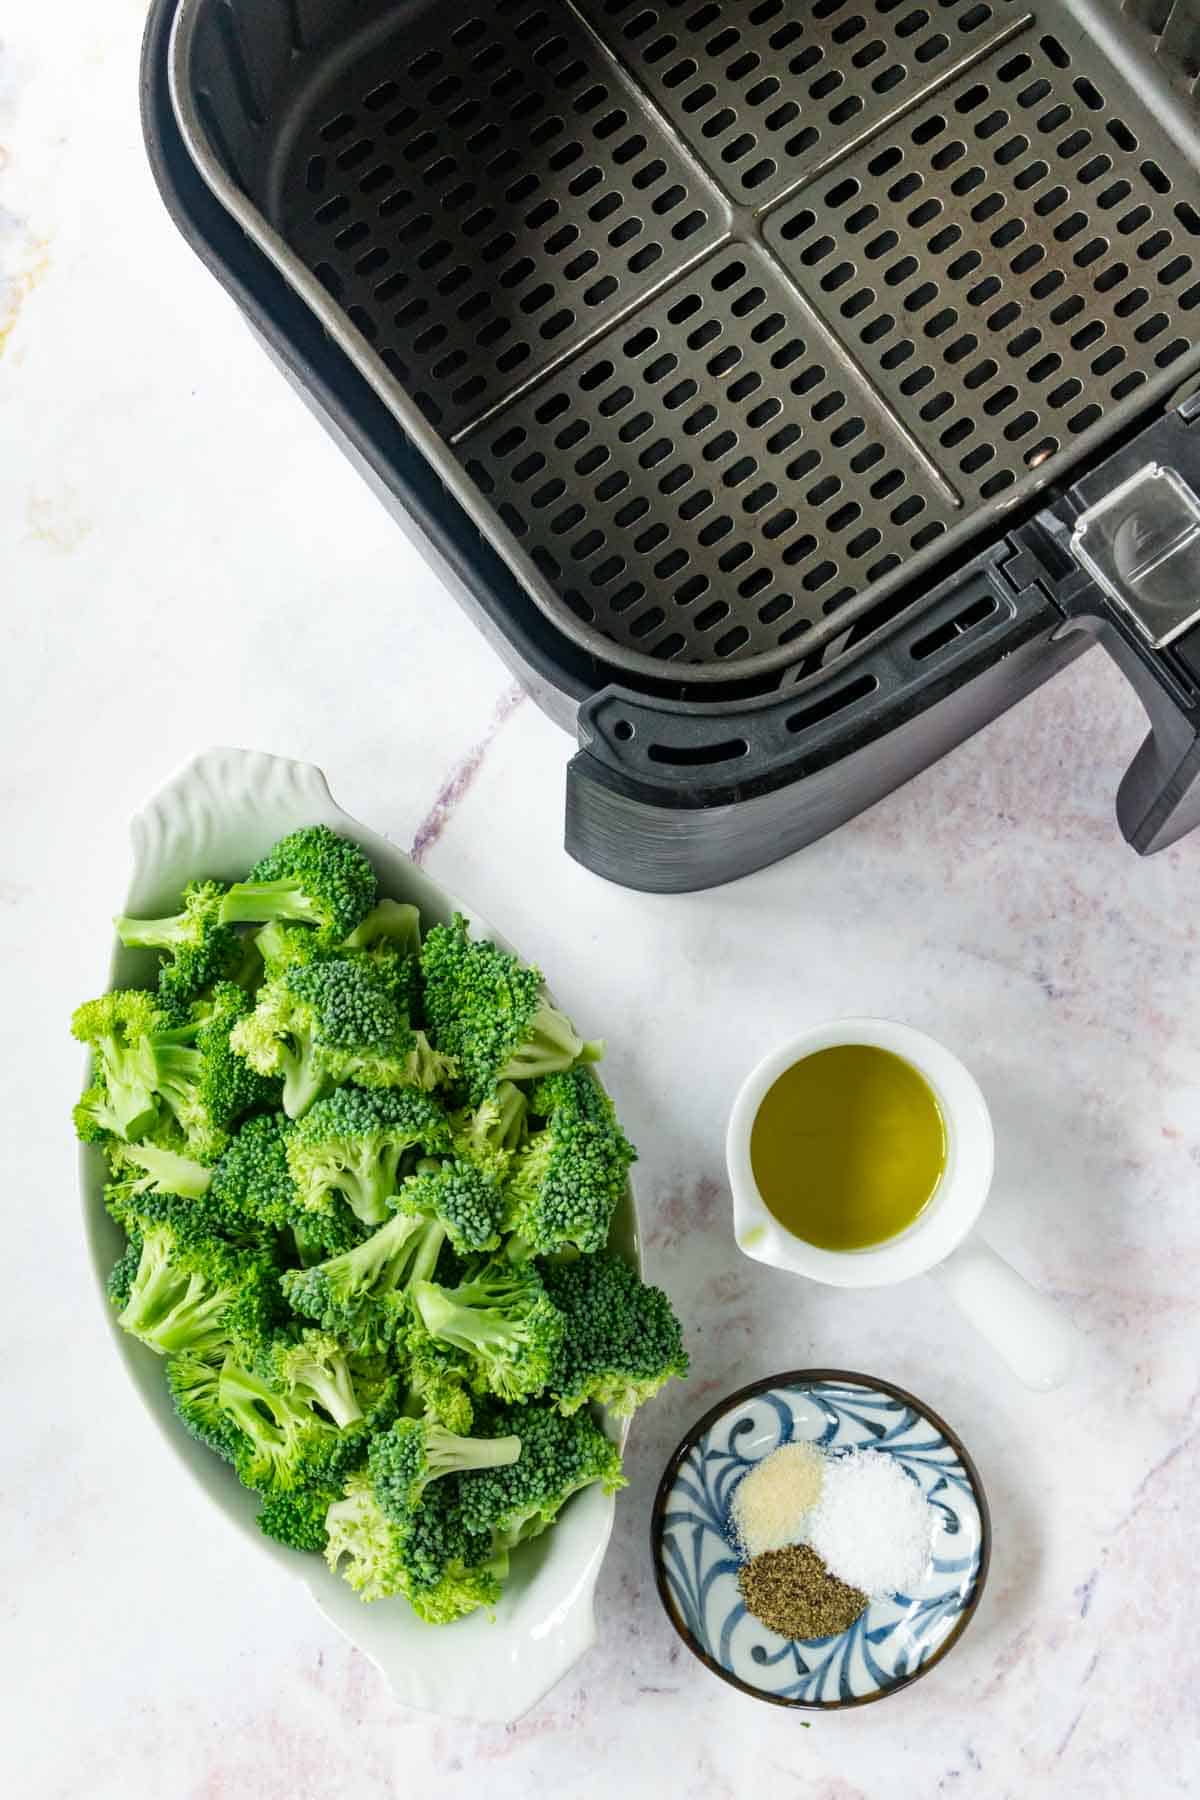 The ingredients for air fryer broccoli.